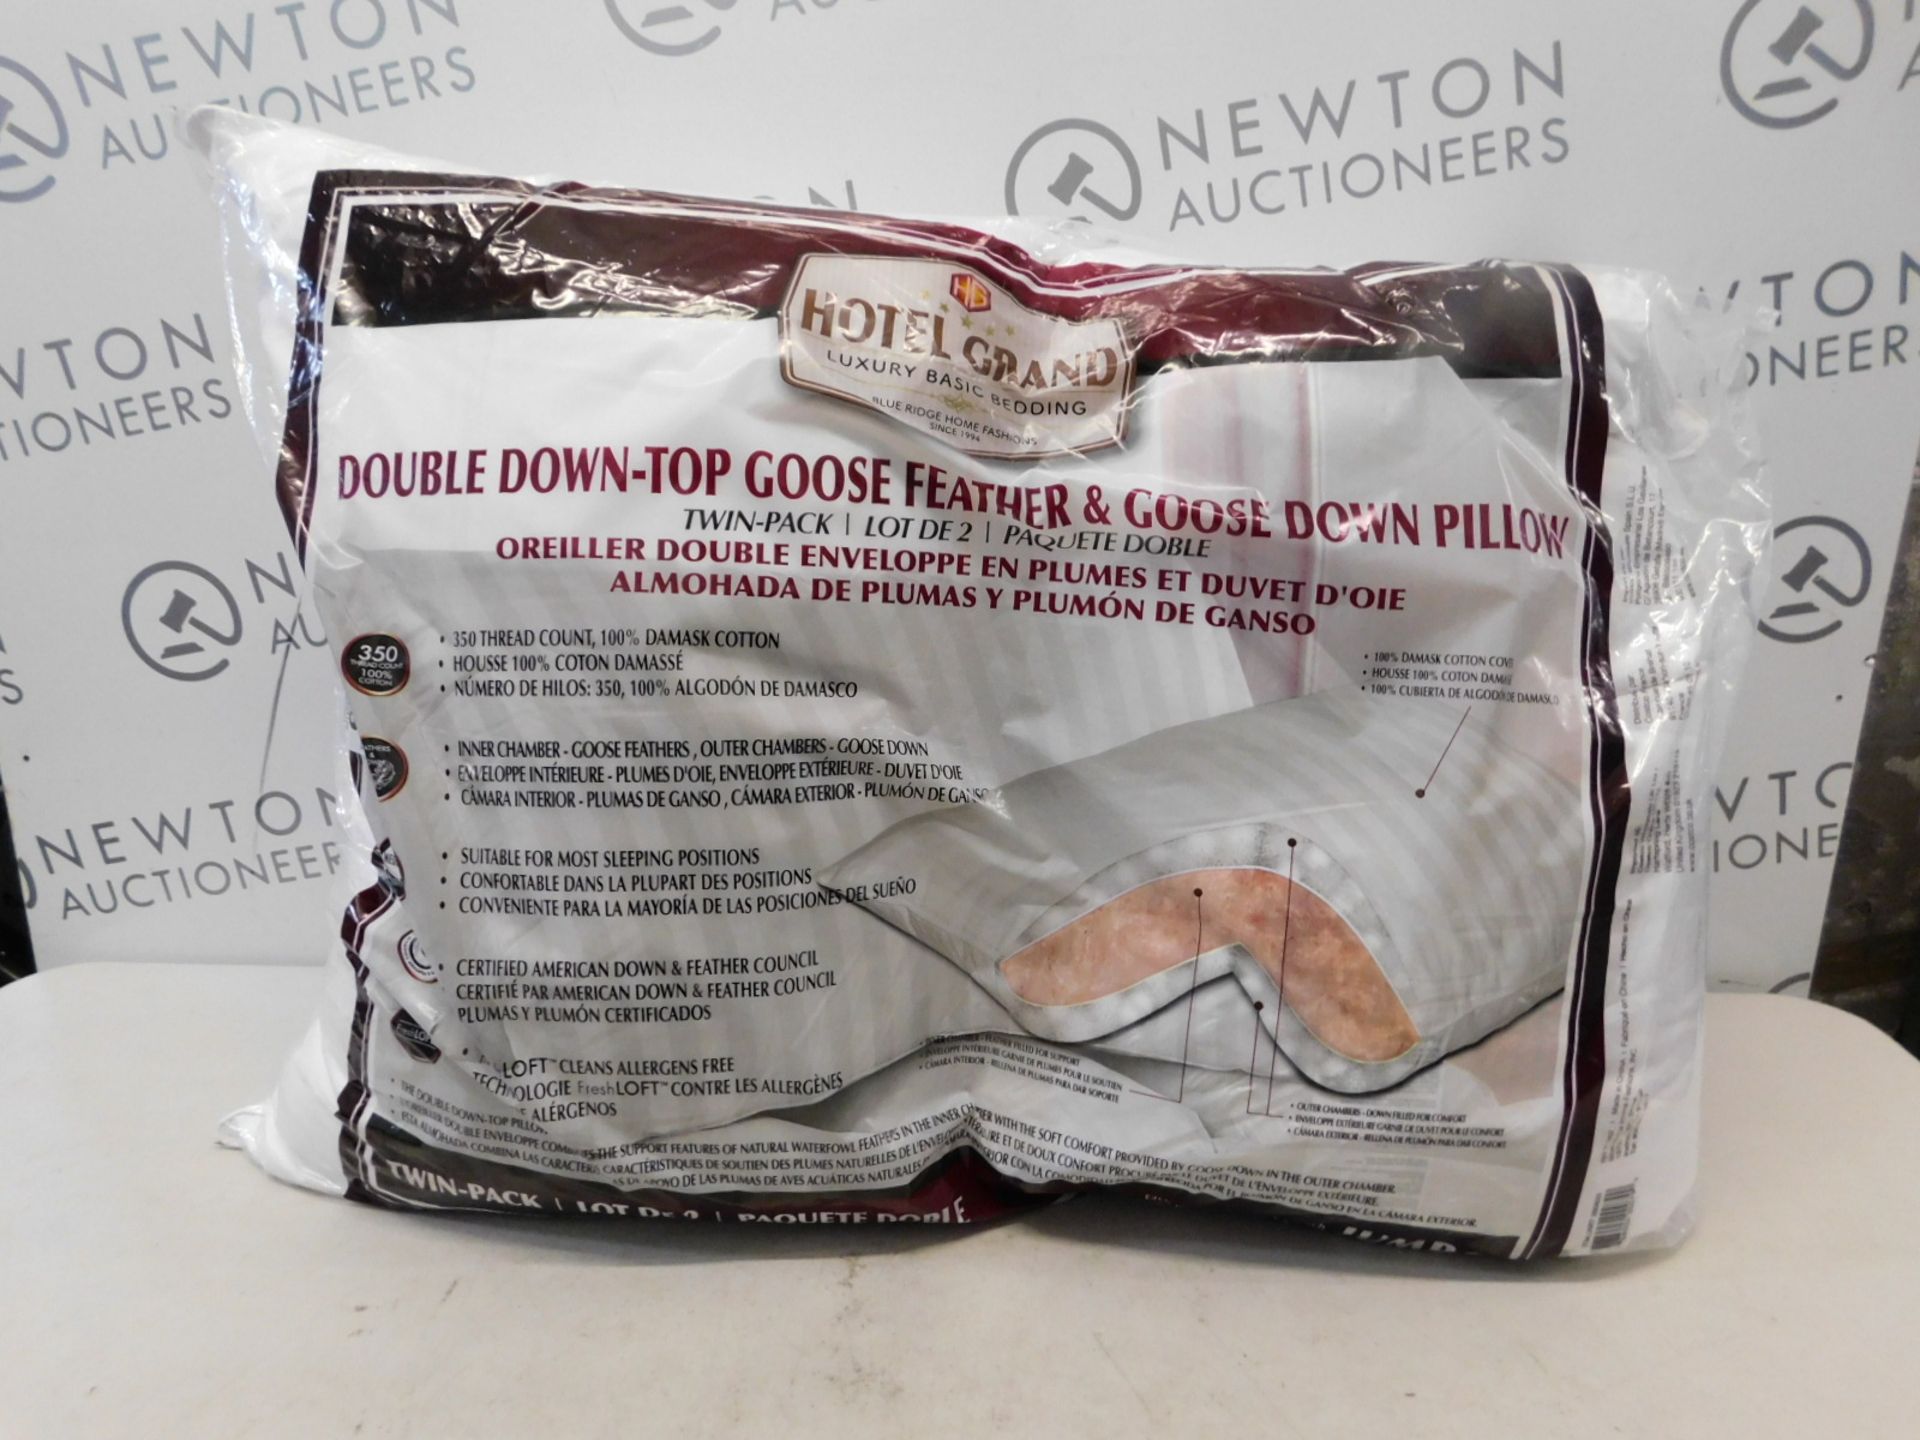 1 PACK OF 2 HOTEL GRAND DOUBLE TOP GOOSE FEATHER & GOOSE DOWN PILLOWS RRP Â£39.99